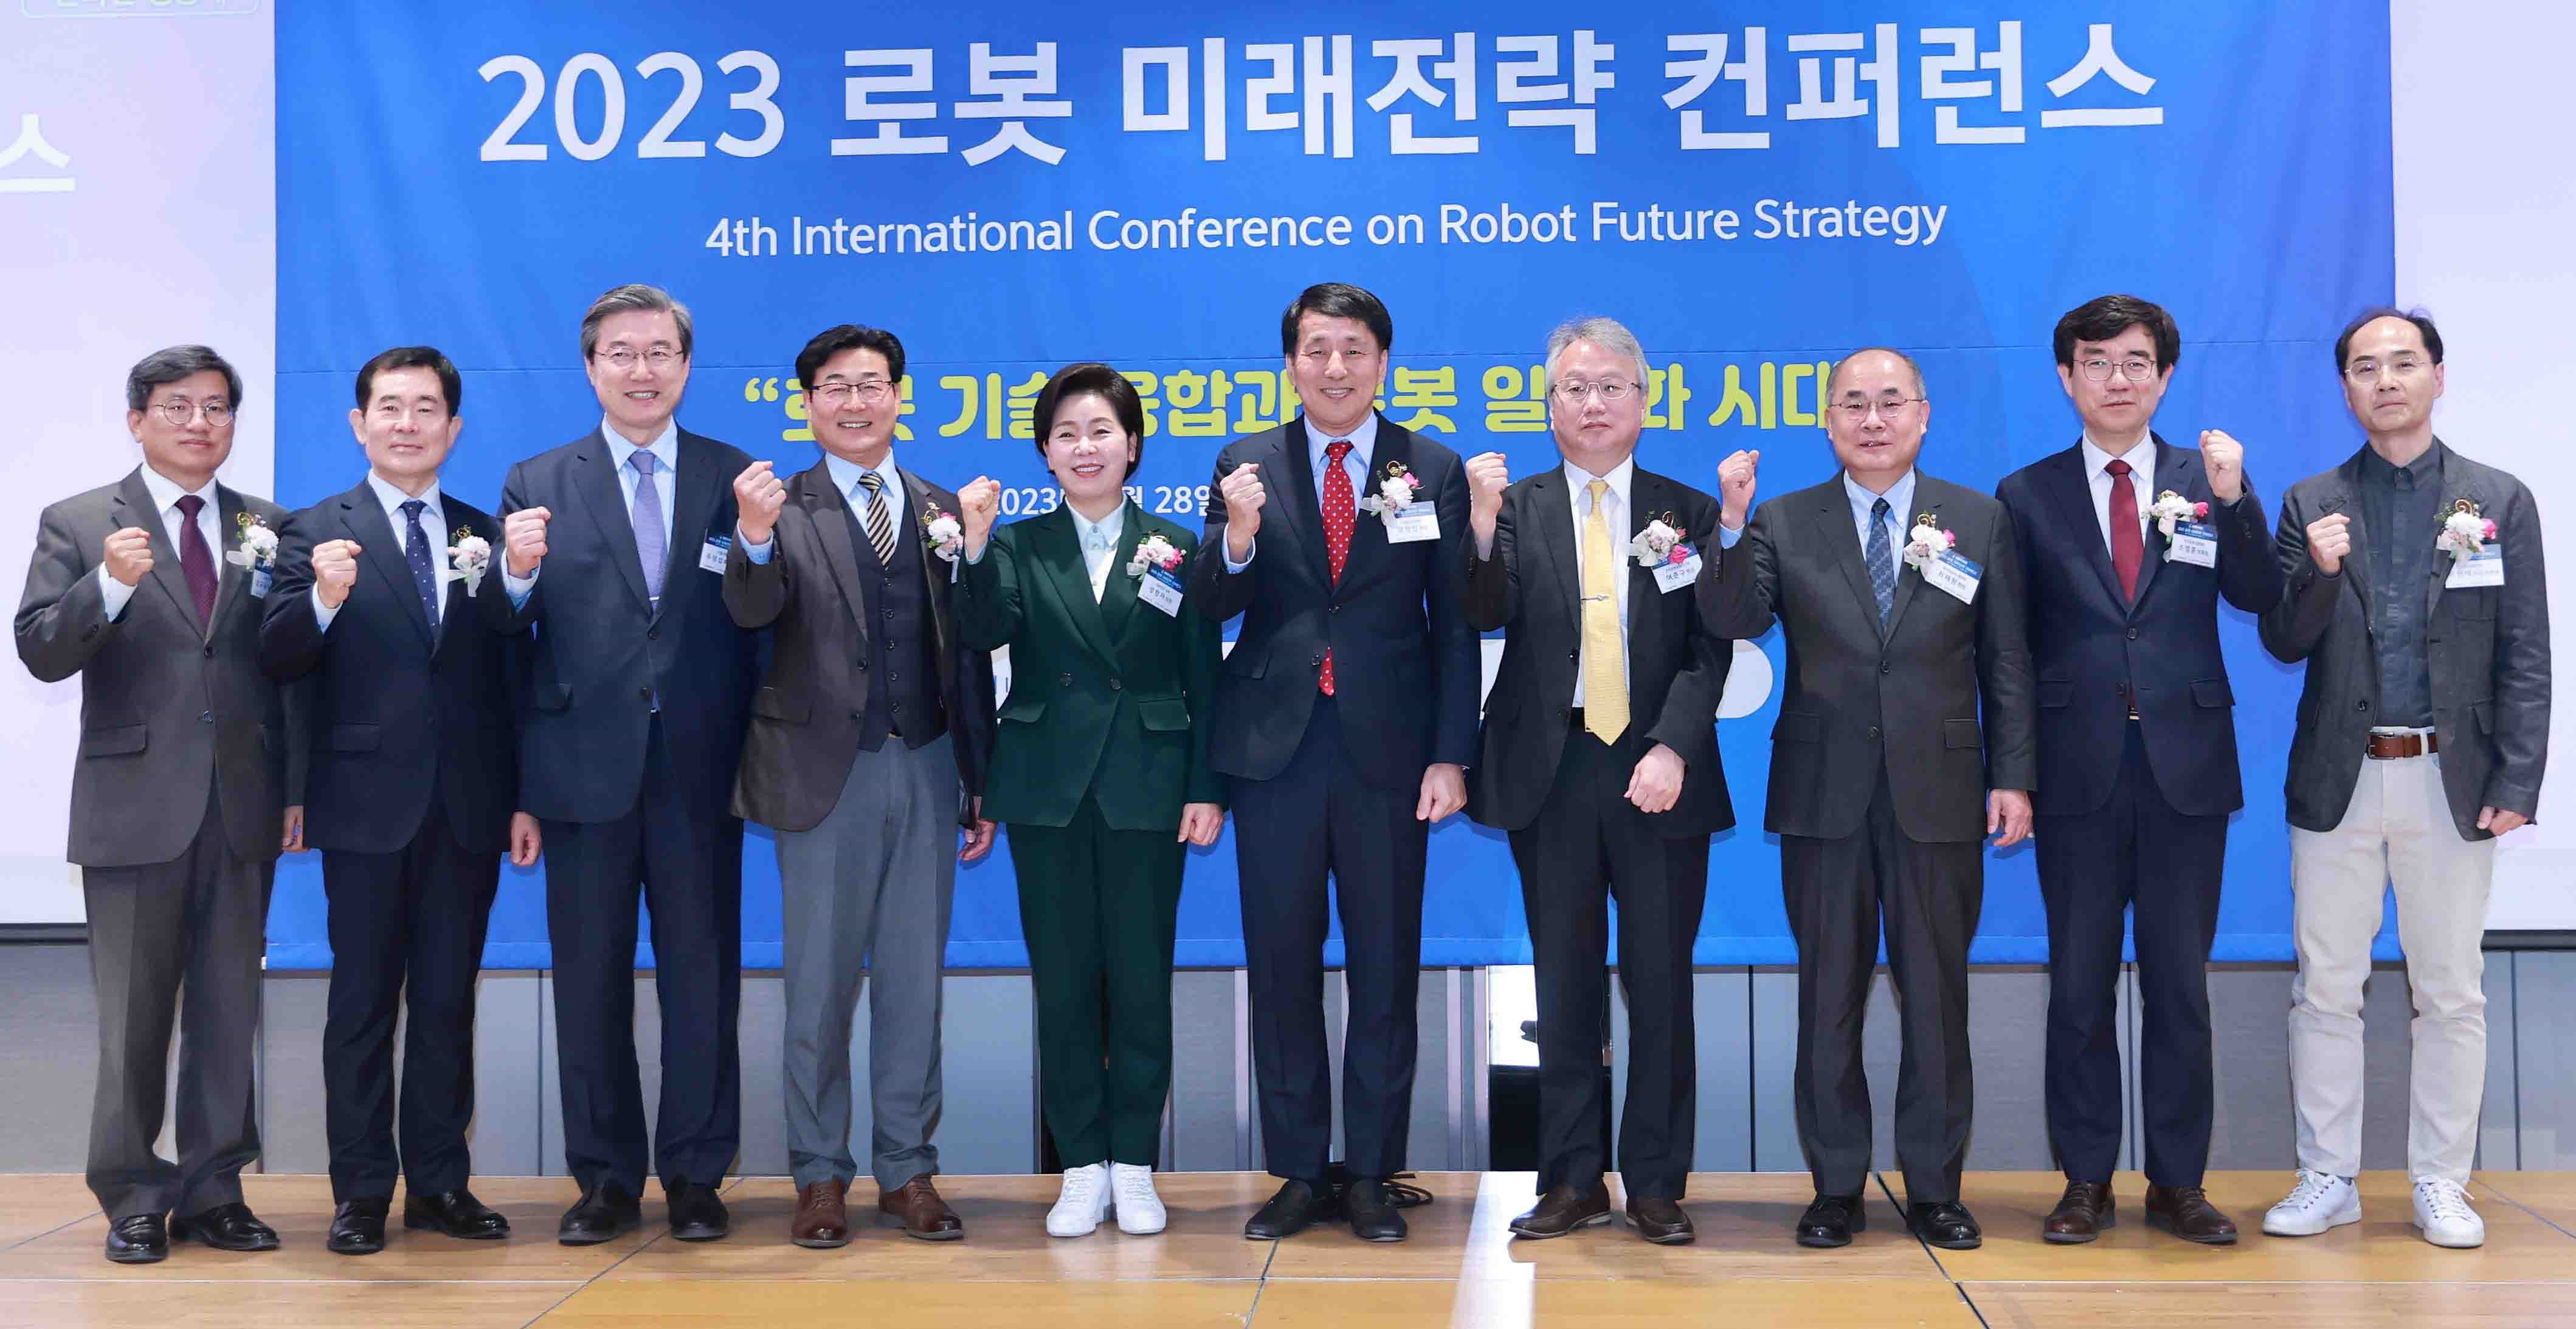 1st Vice Minister attends 4th International Conference on Robot Future Strategy Image 0